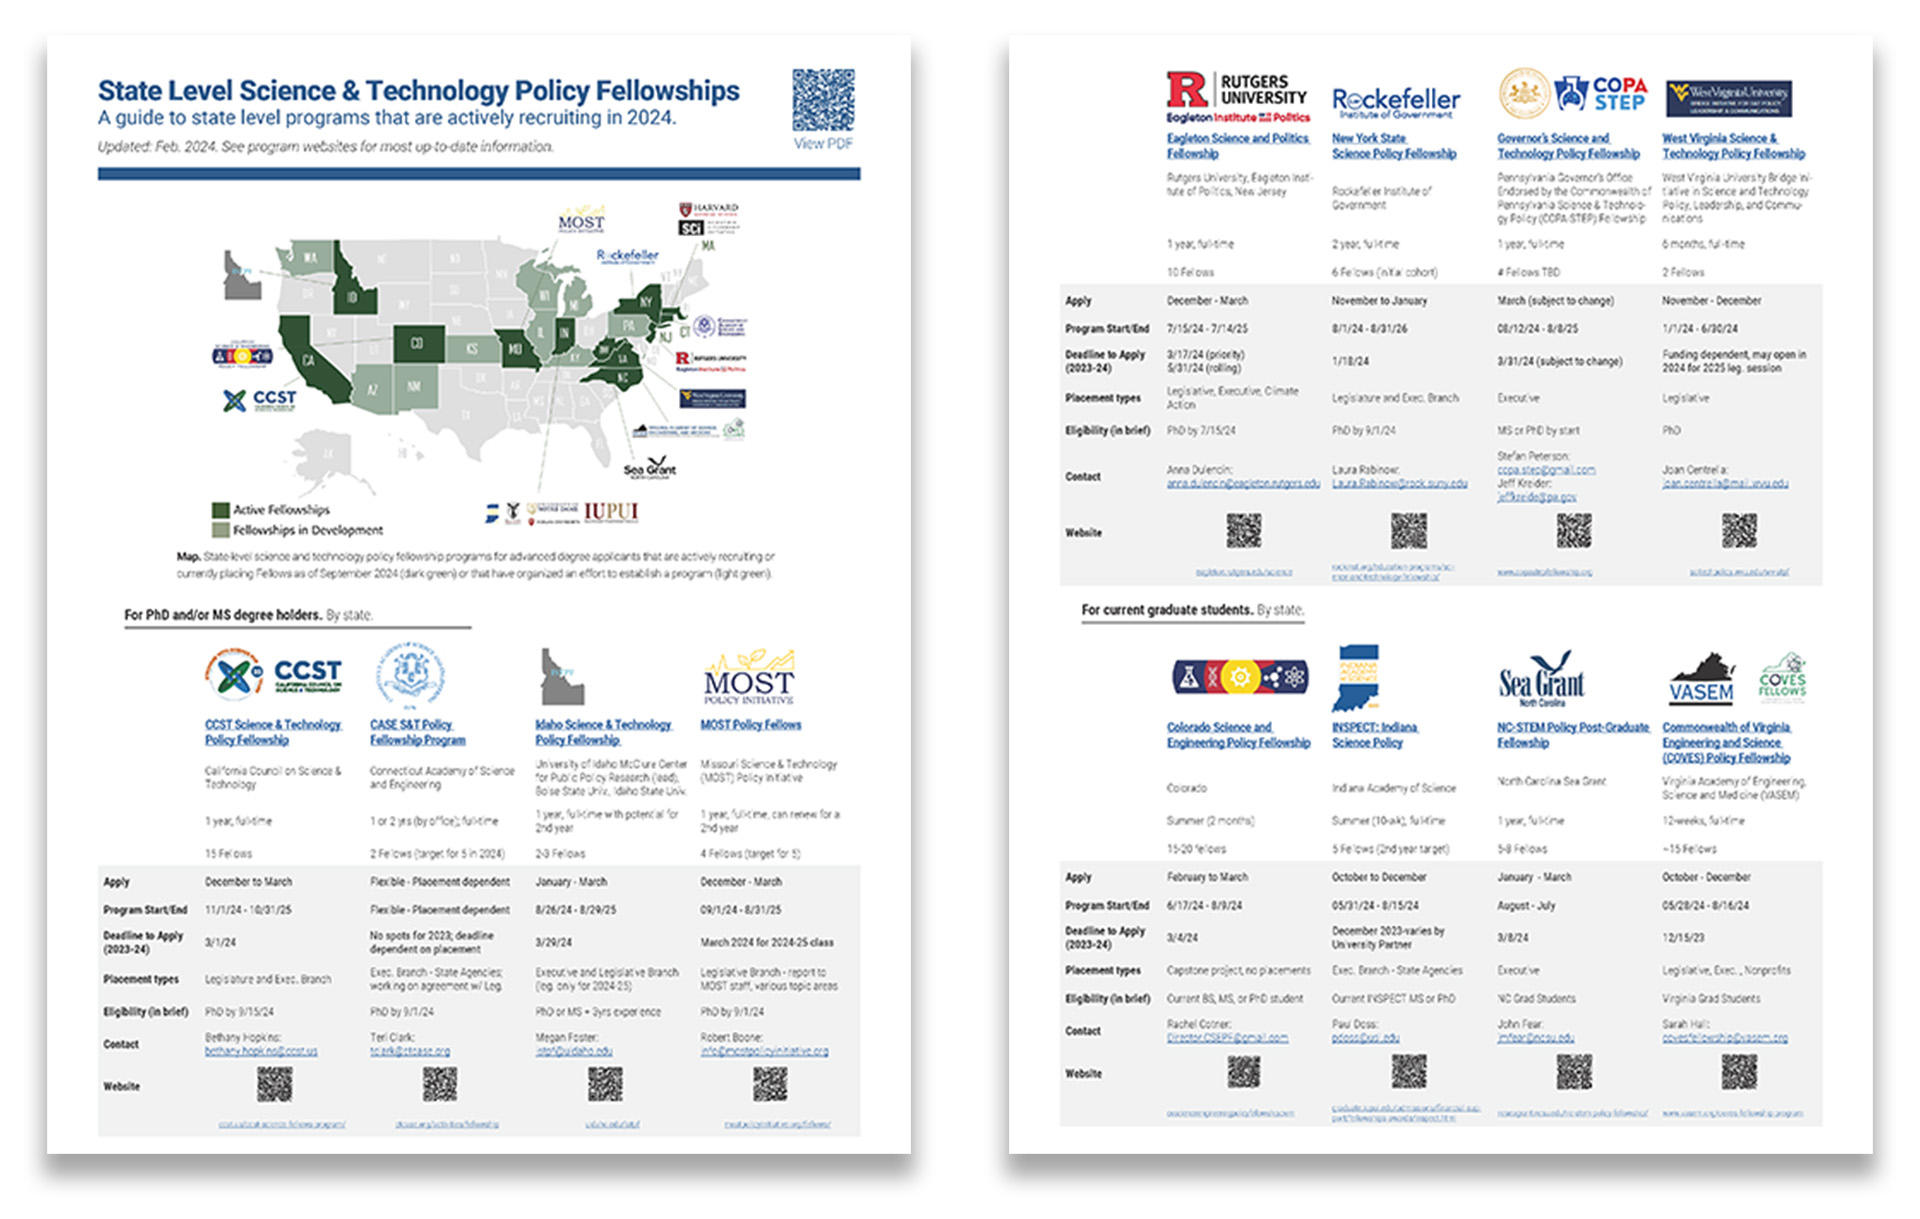 The front and back pages of a State Science Policy Fellowships guide side by side.